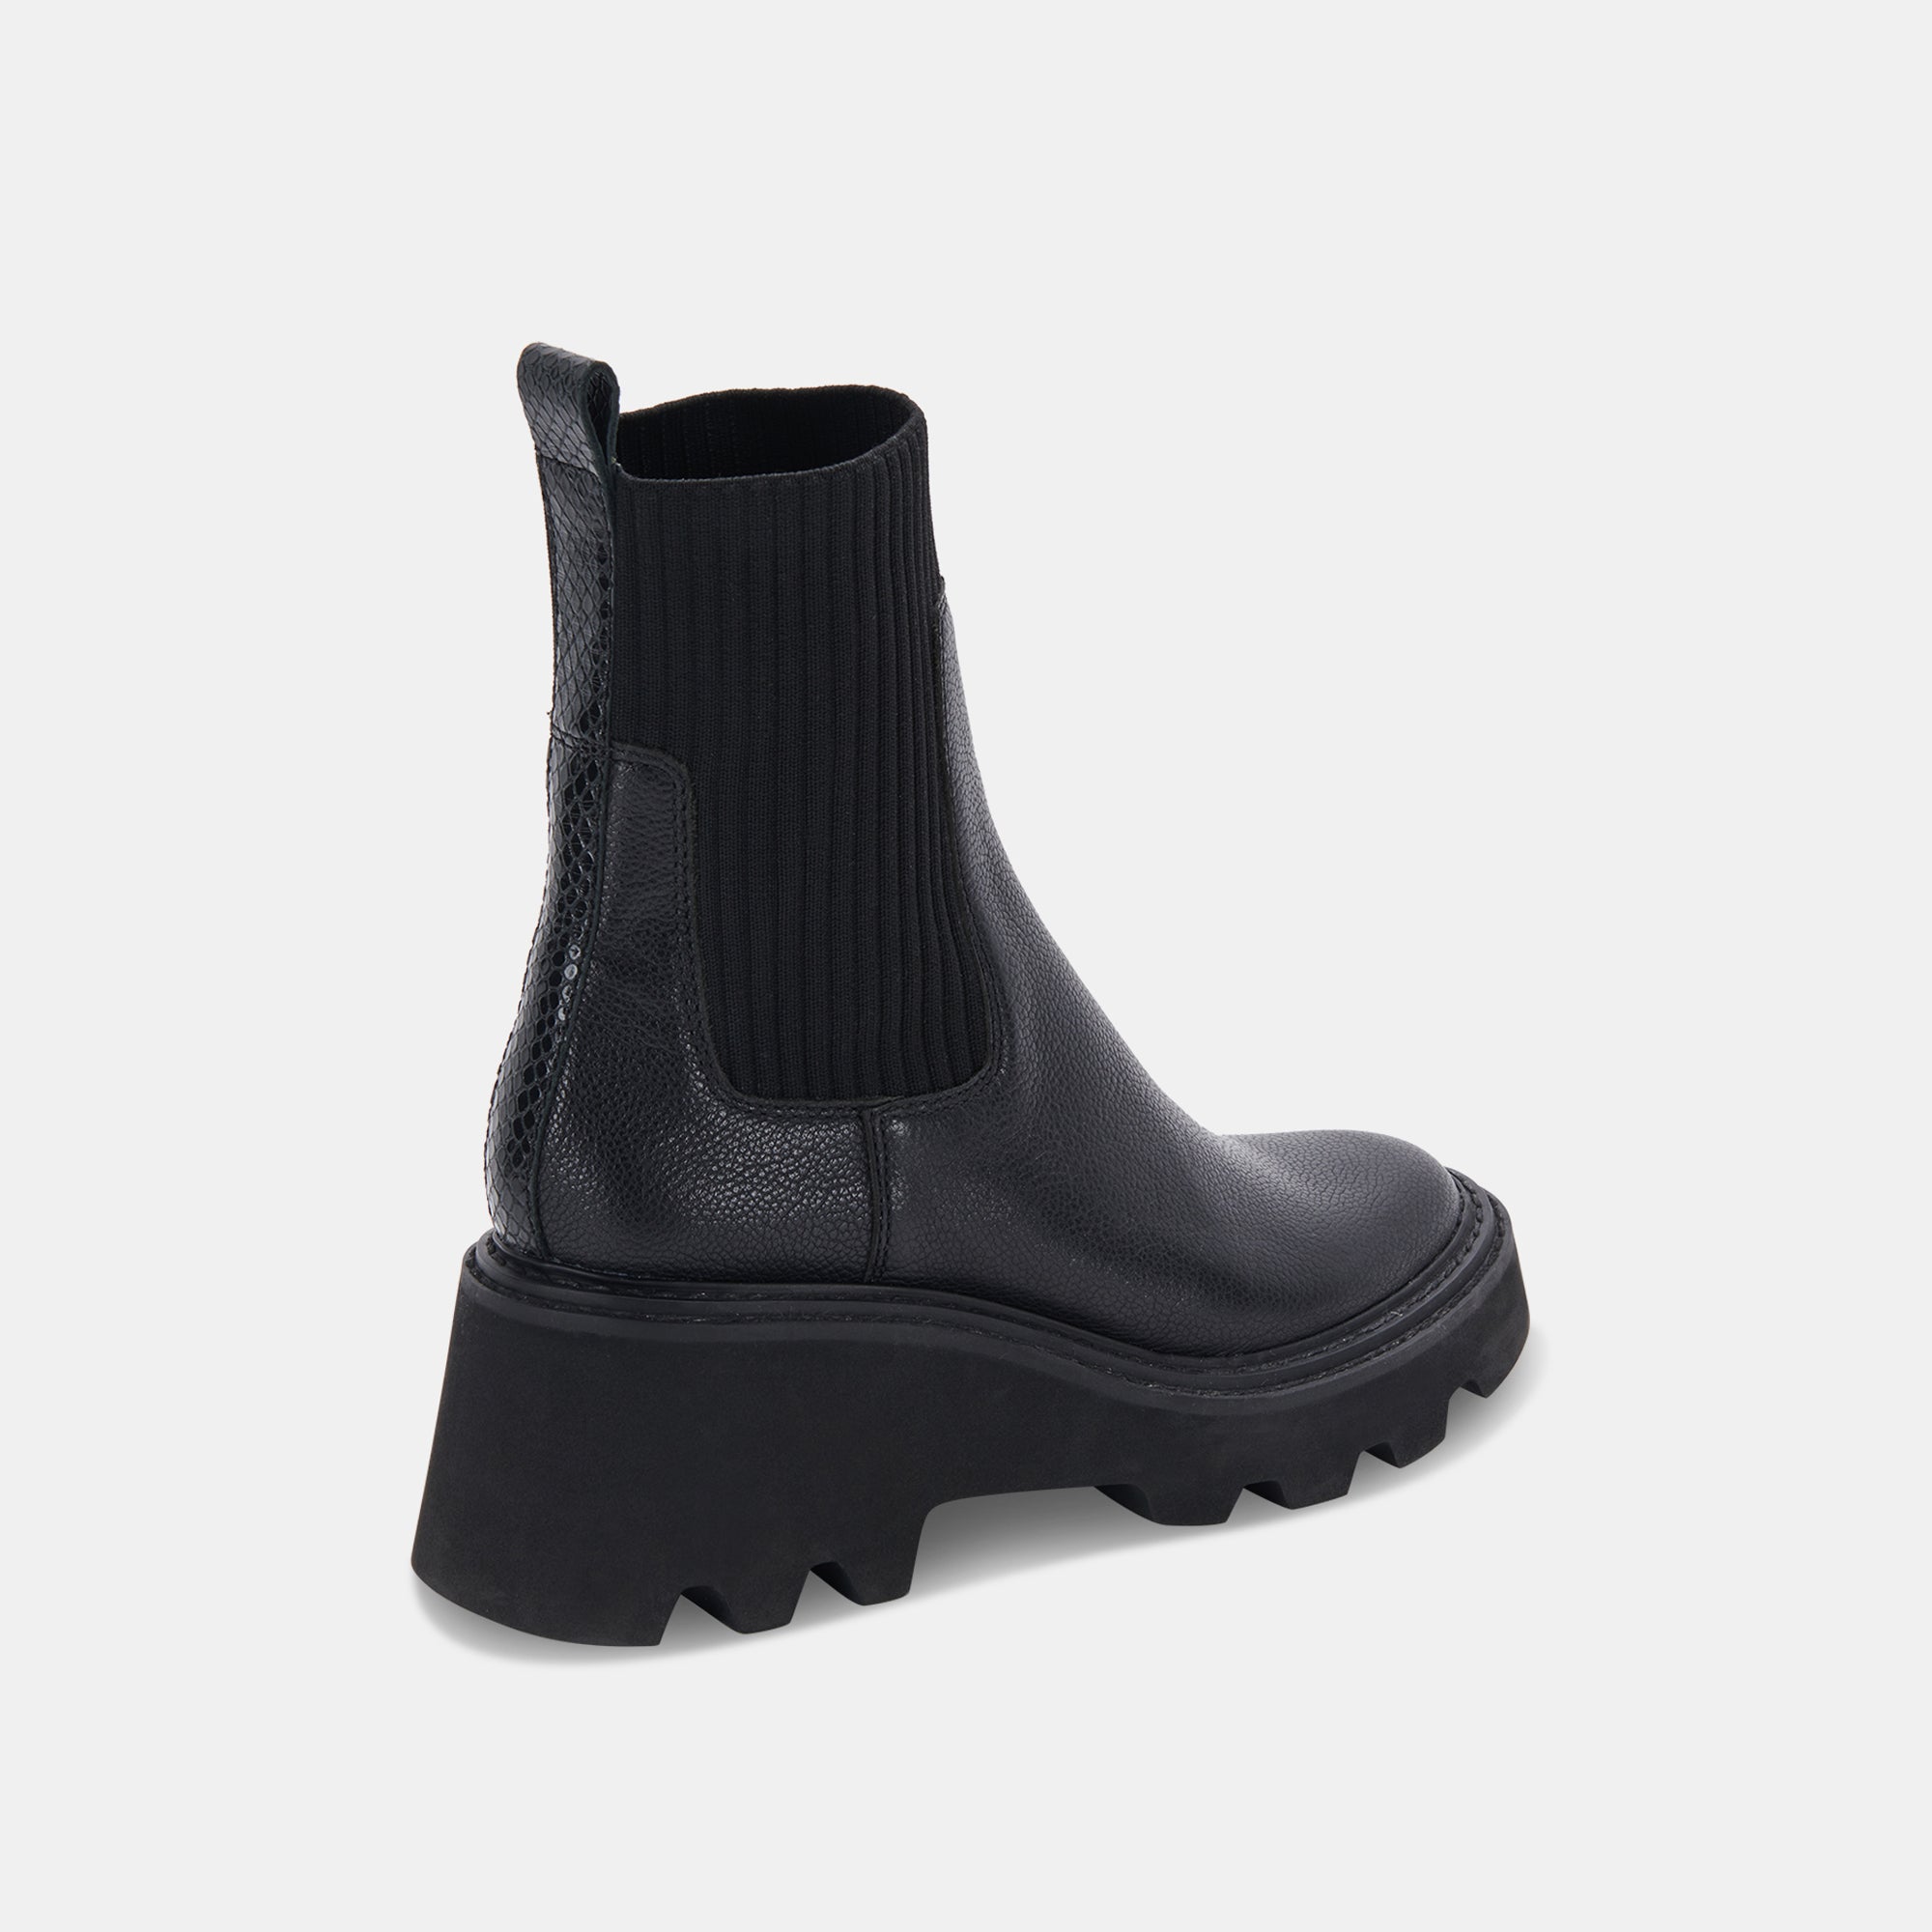 HOVEN H2O BOOTS BLACK LEATHER – Dolce Vita